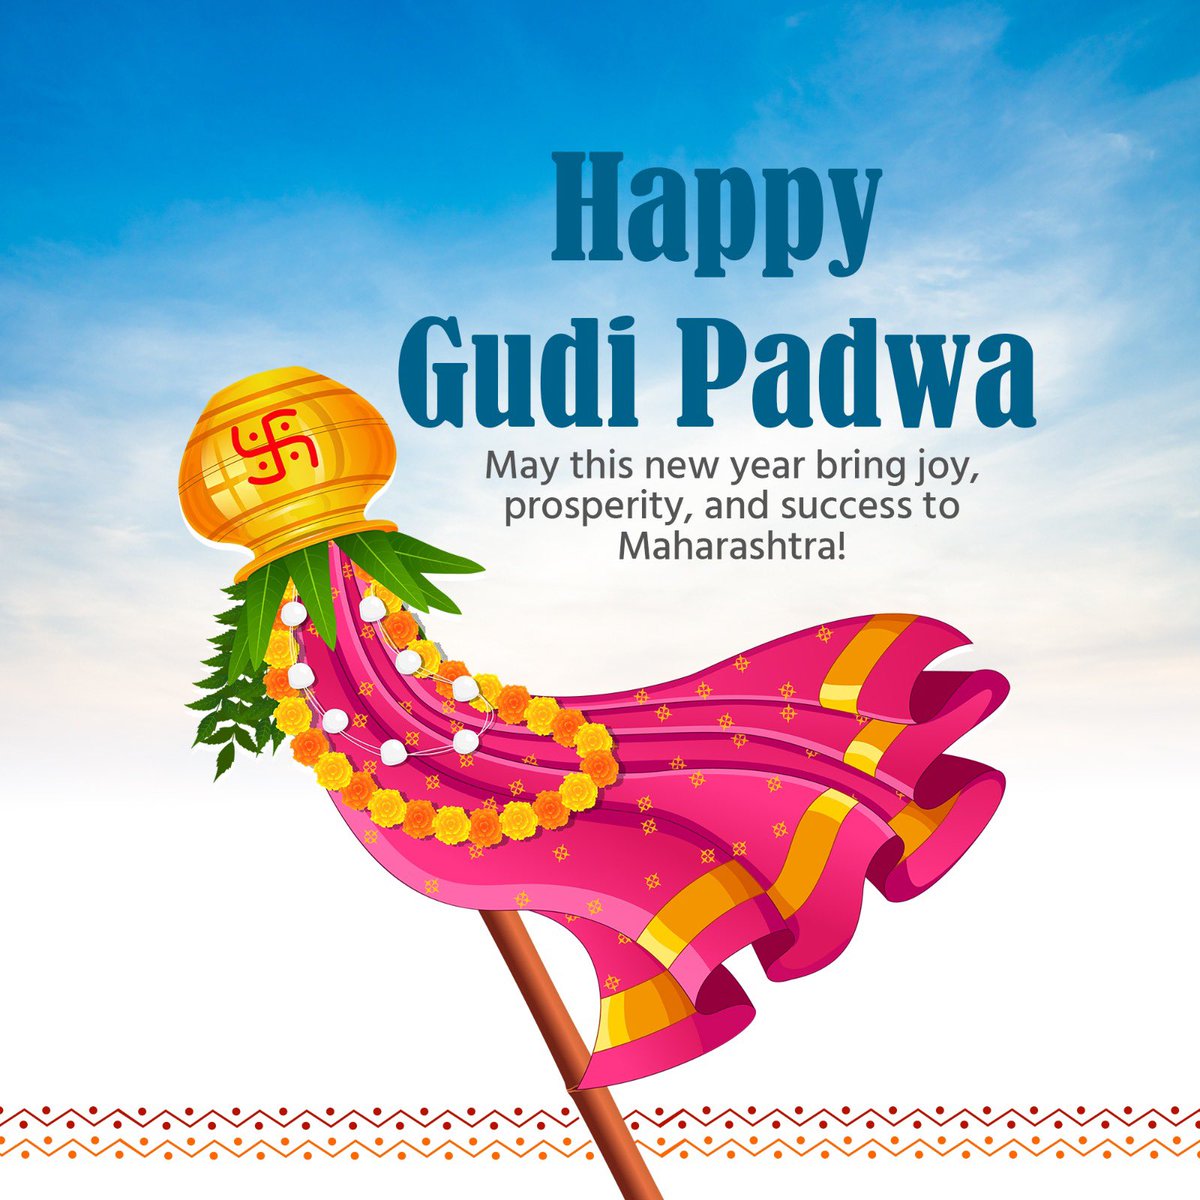 Happy #GudiPadwa! 

Let’s welcome the new year with positivity, prosperity, and a renewed sense of unity. Here’s to celebrating #Maharashtra’s traditions and progress! #

 #tradition #celebration #newbeginnings #prosperity #culture #heritage #unity #maharashtrajayate